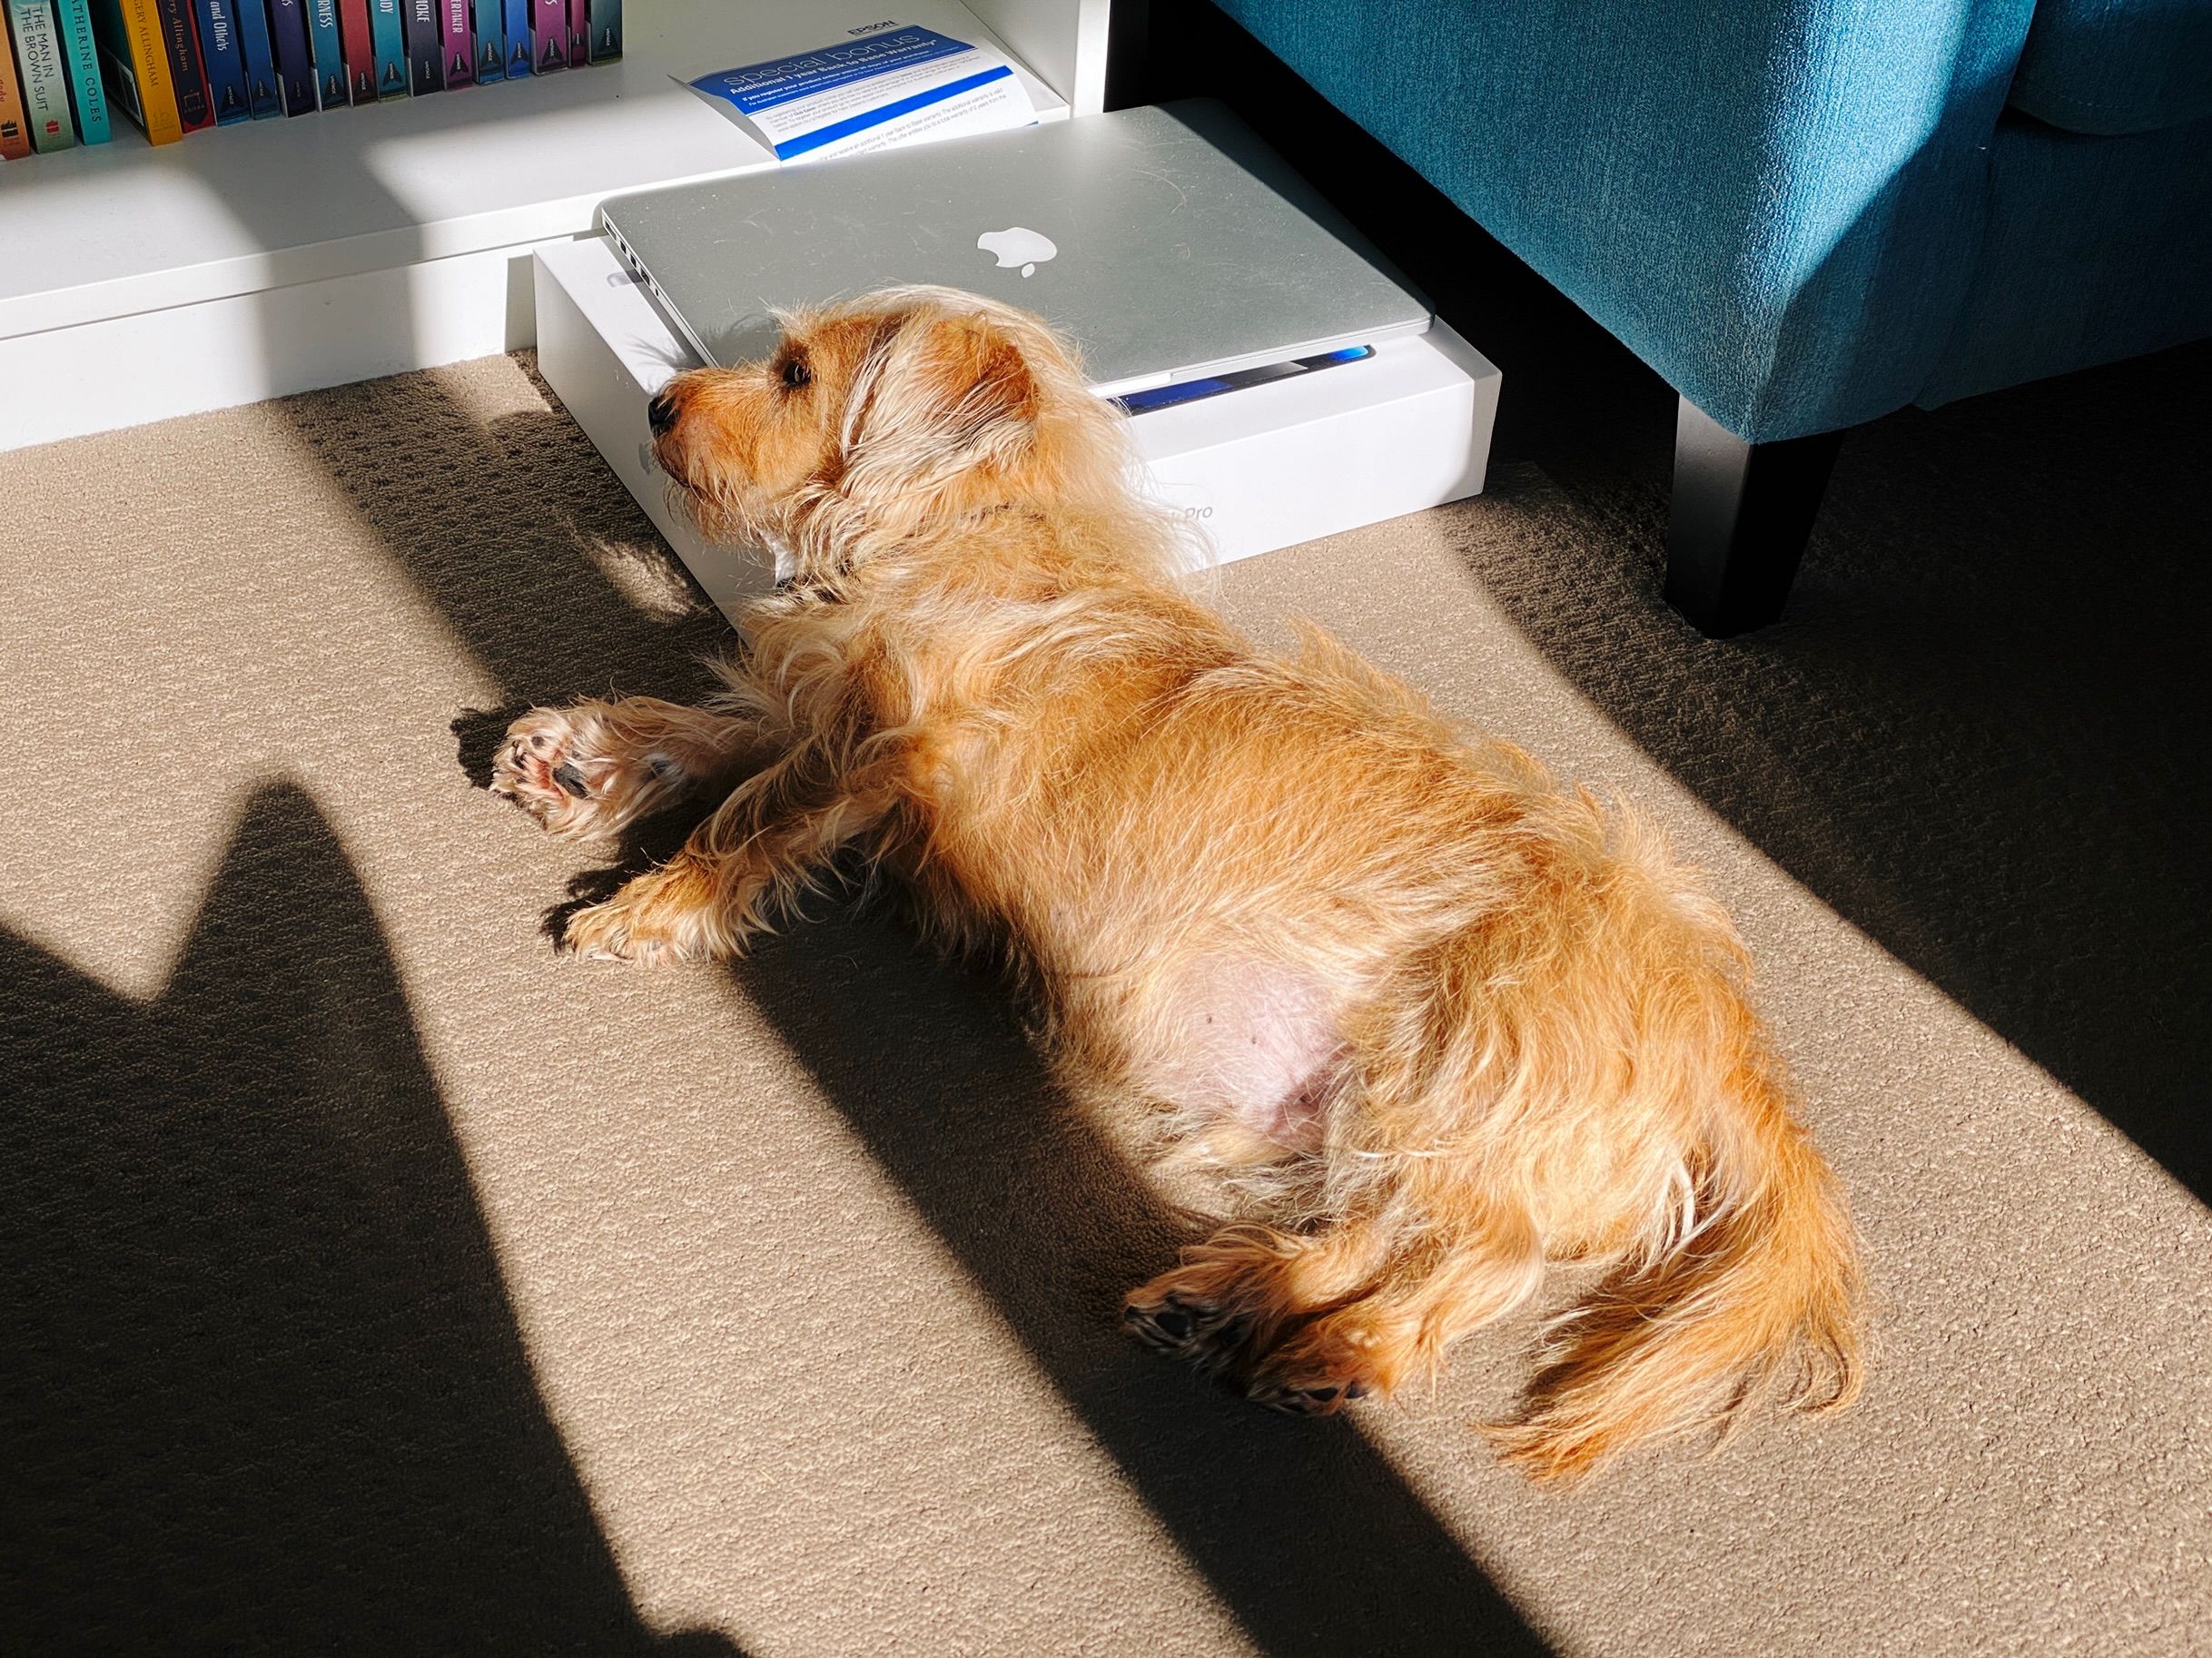 A photo of a small scruffy blonde dog lying on the floor in the sun. His head is propped up on the edge of a MacBook Pro box.